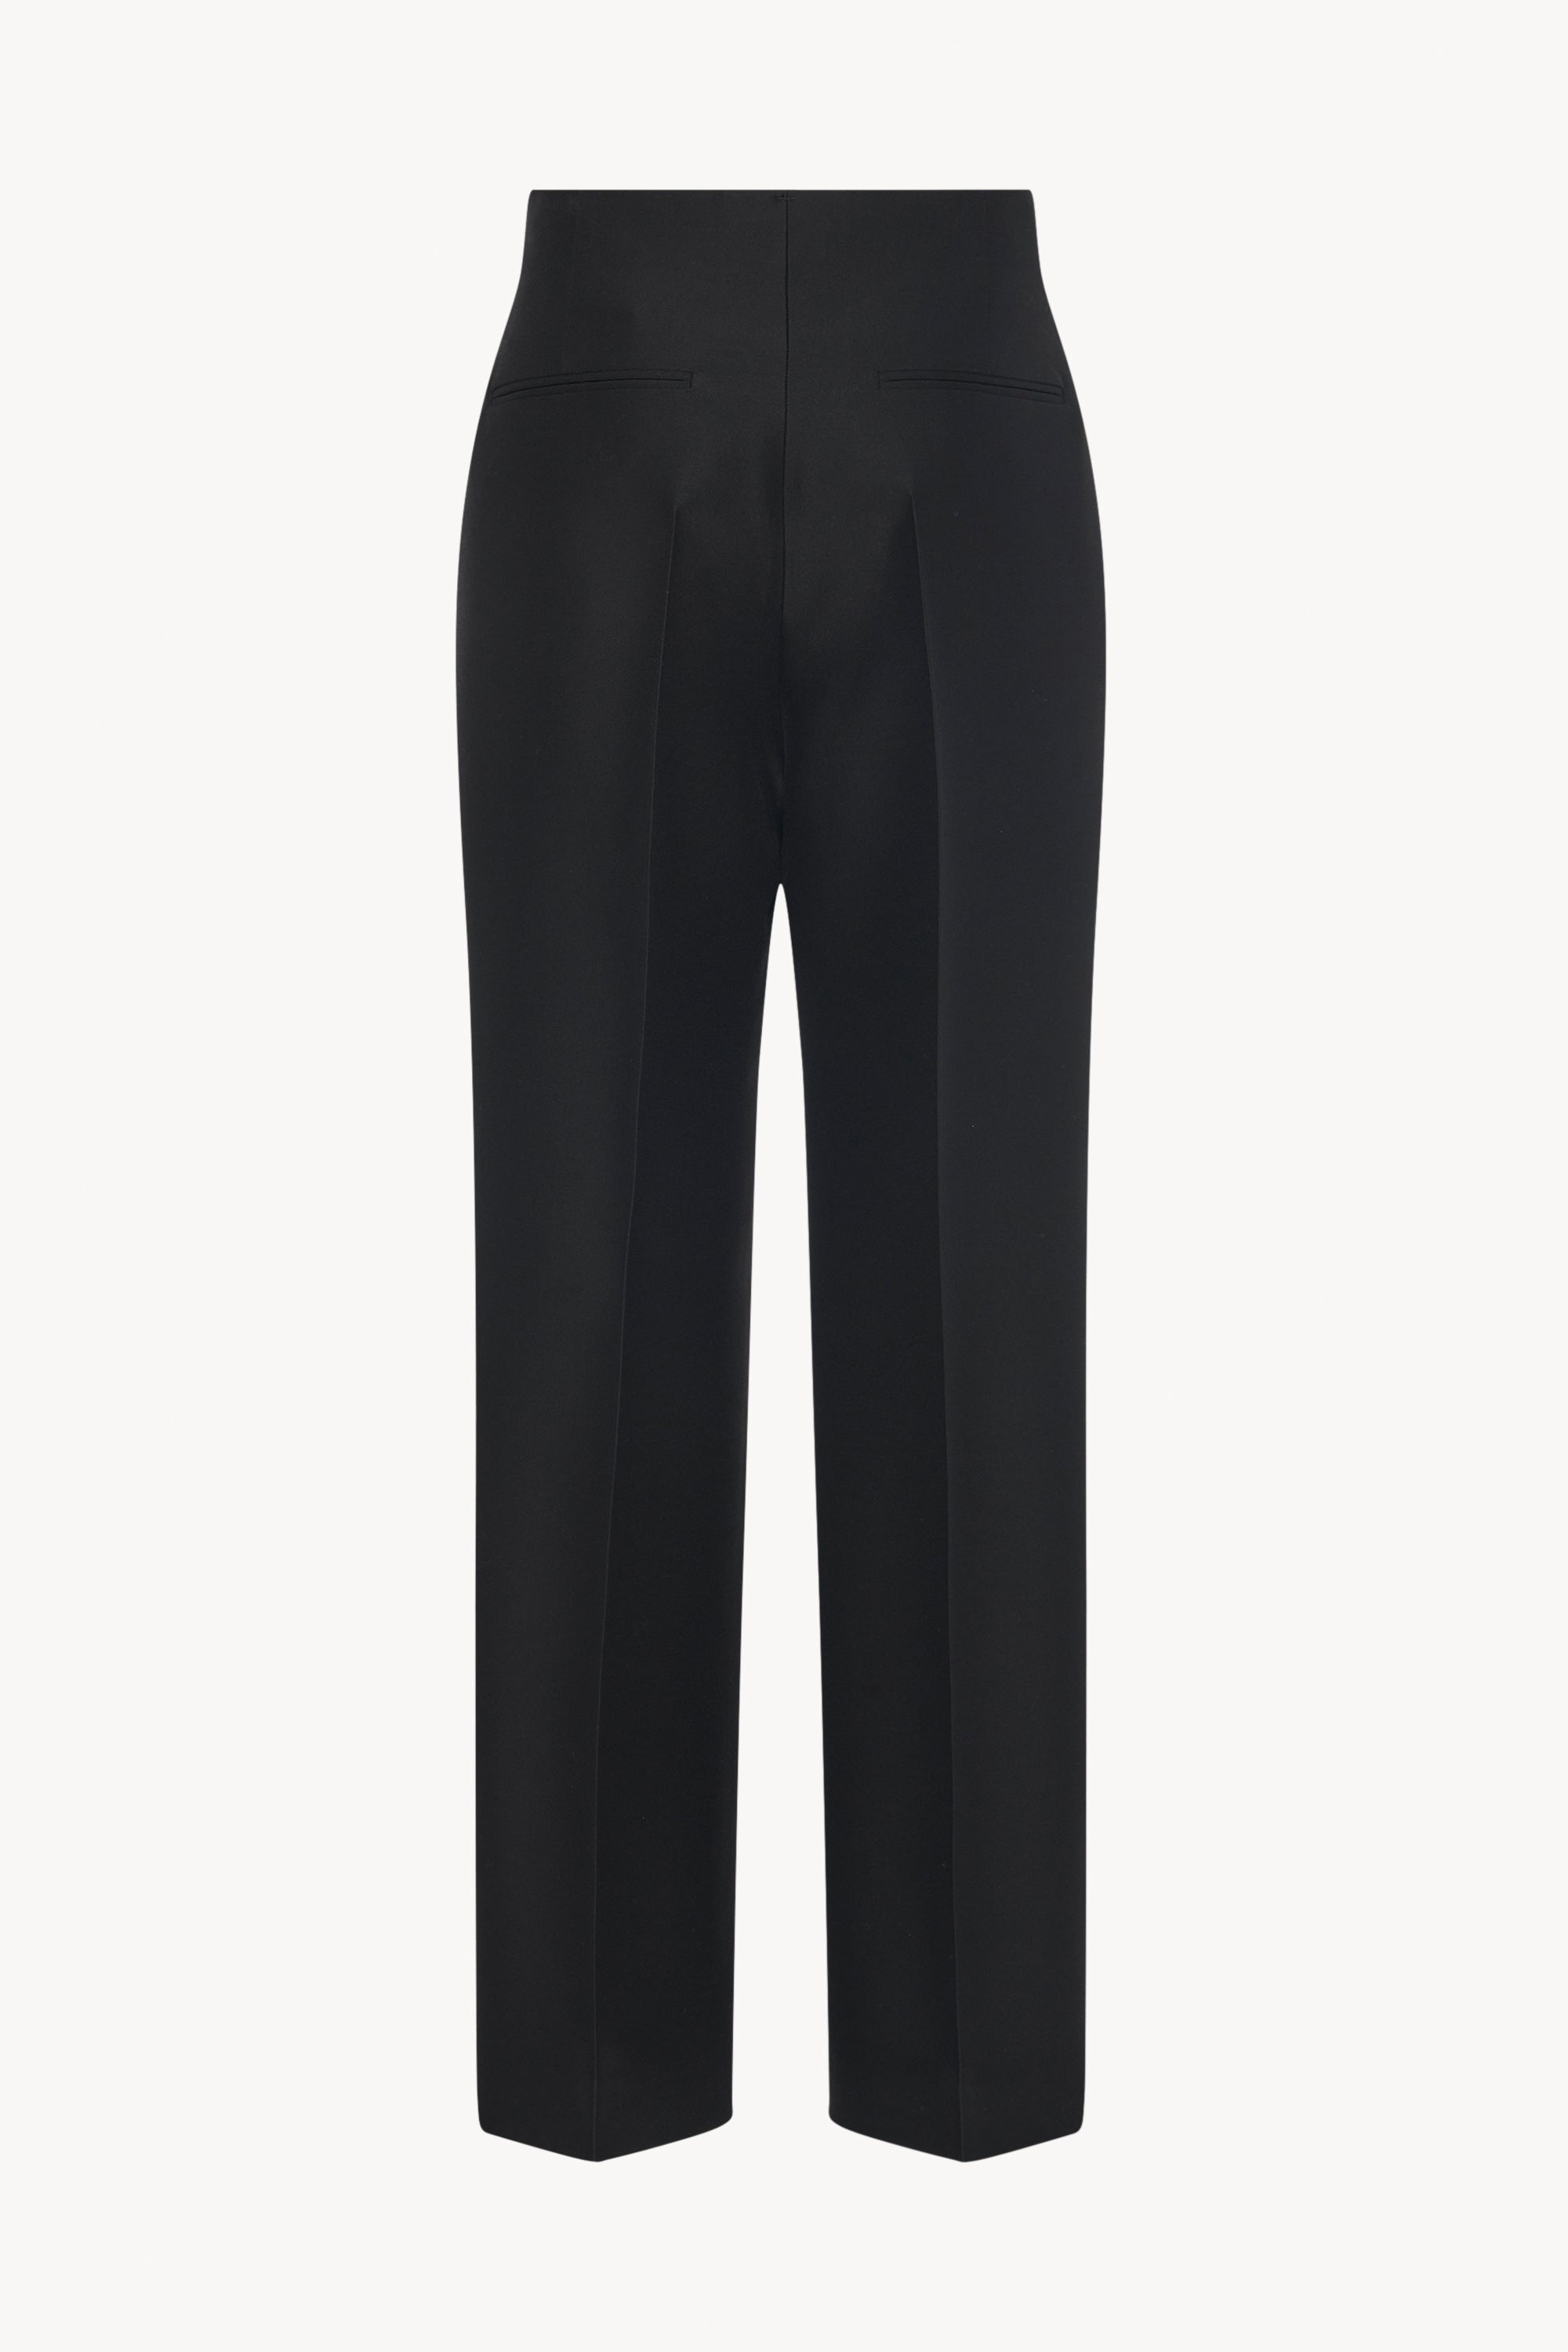 Hector Pant in Wool and Silk - 2